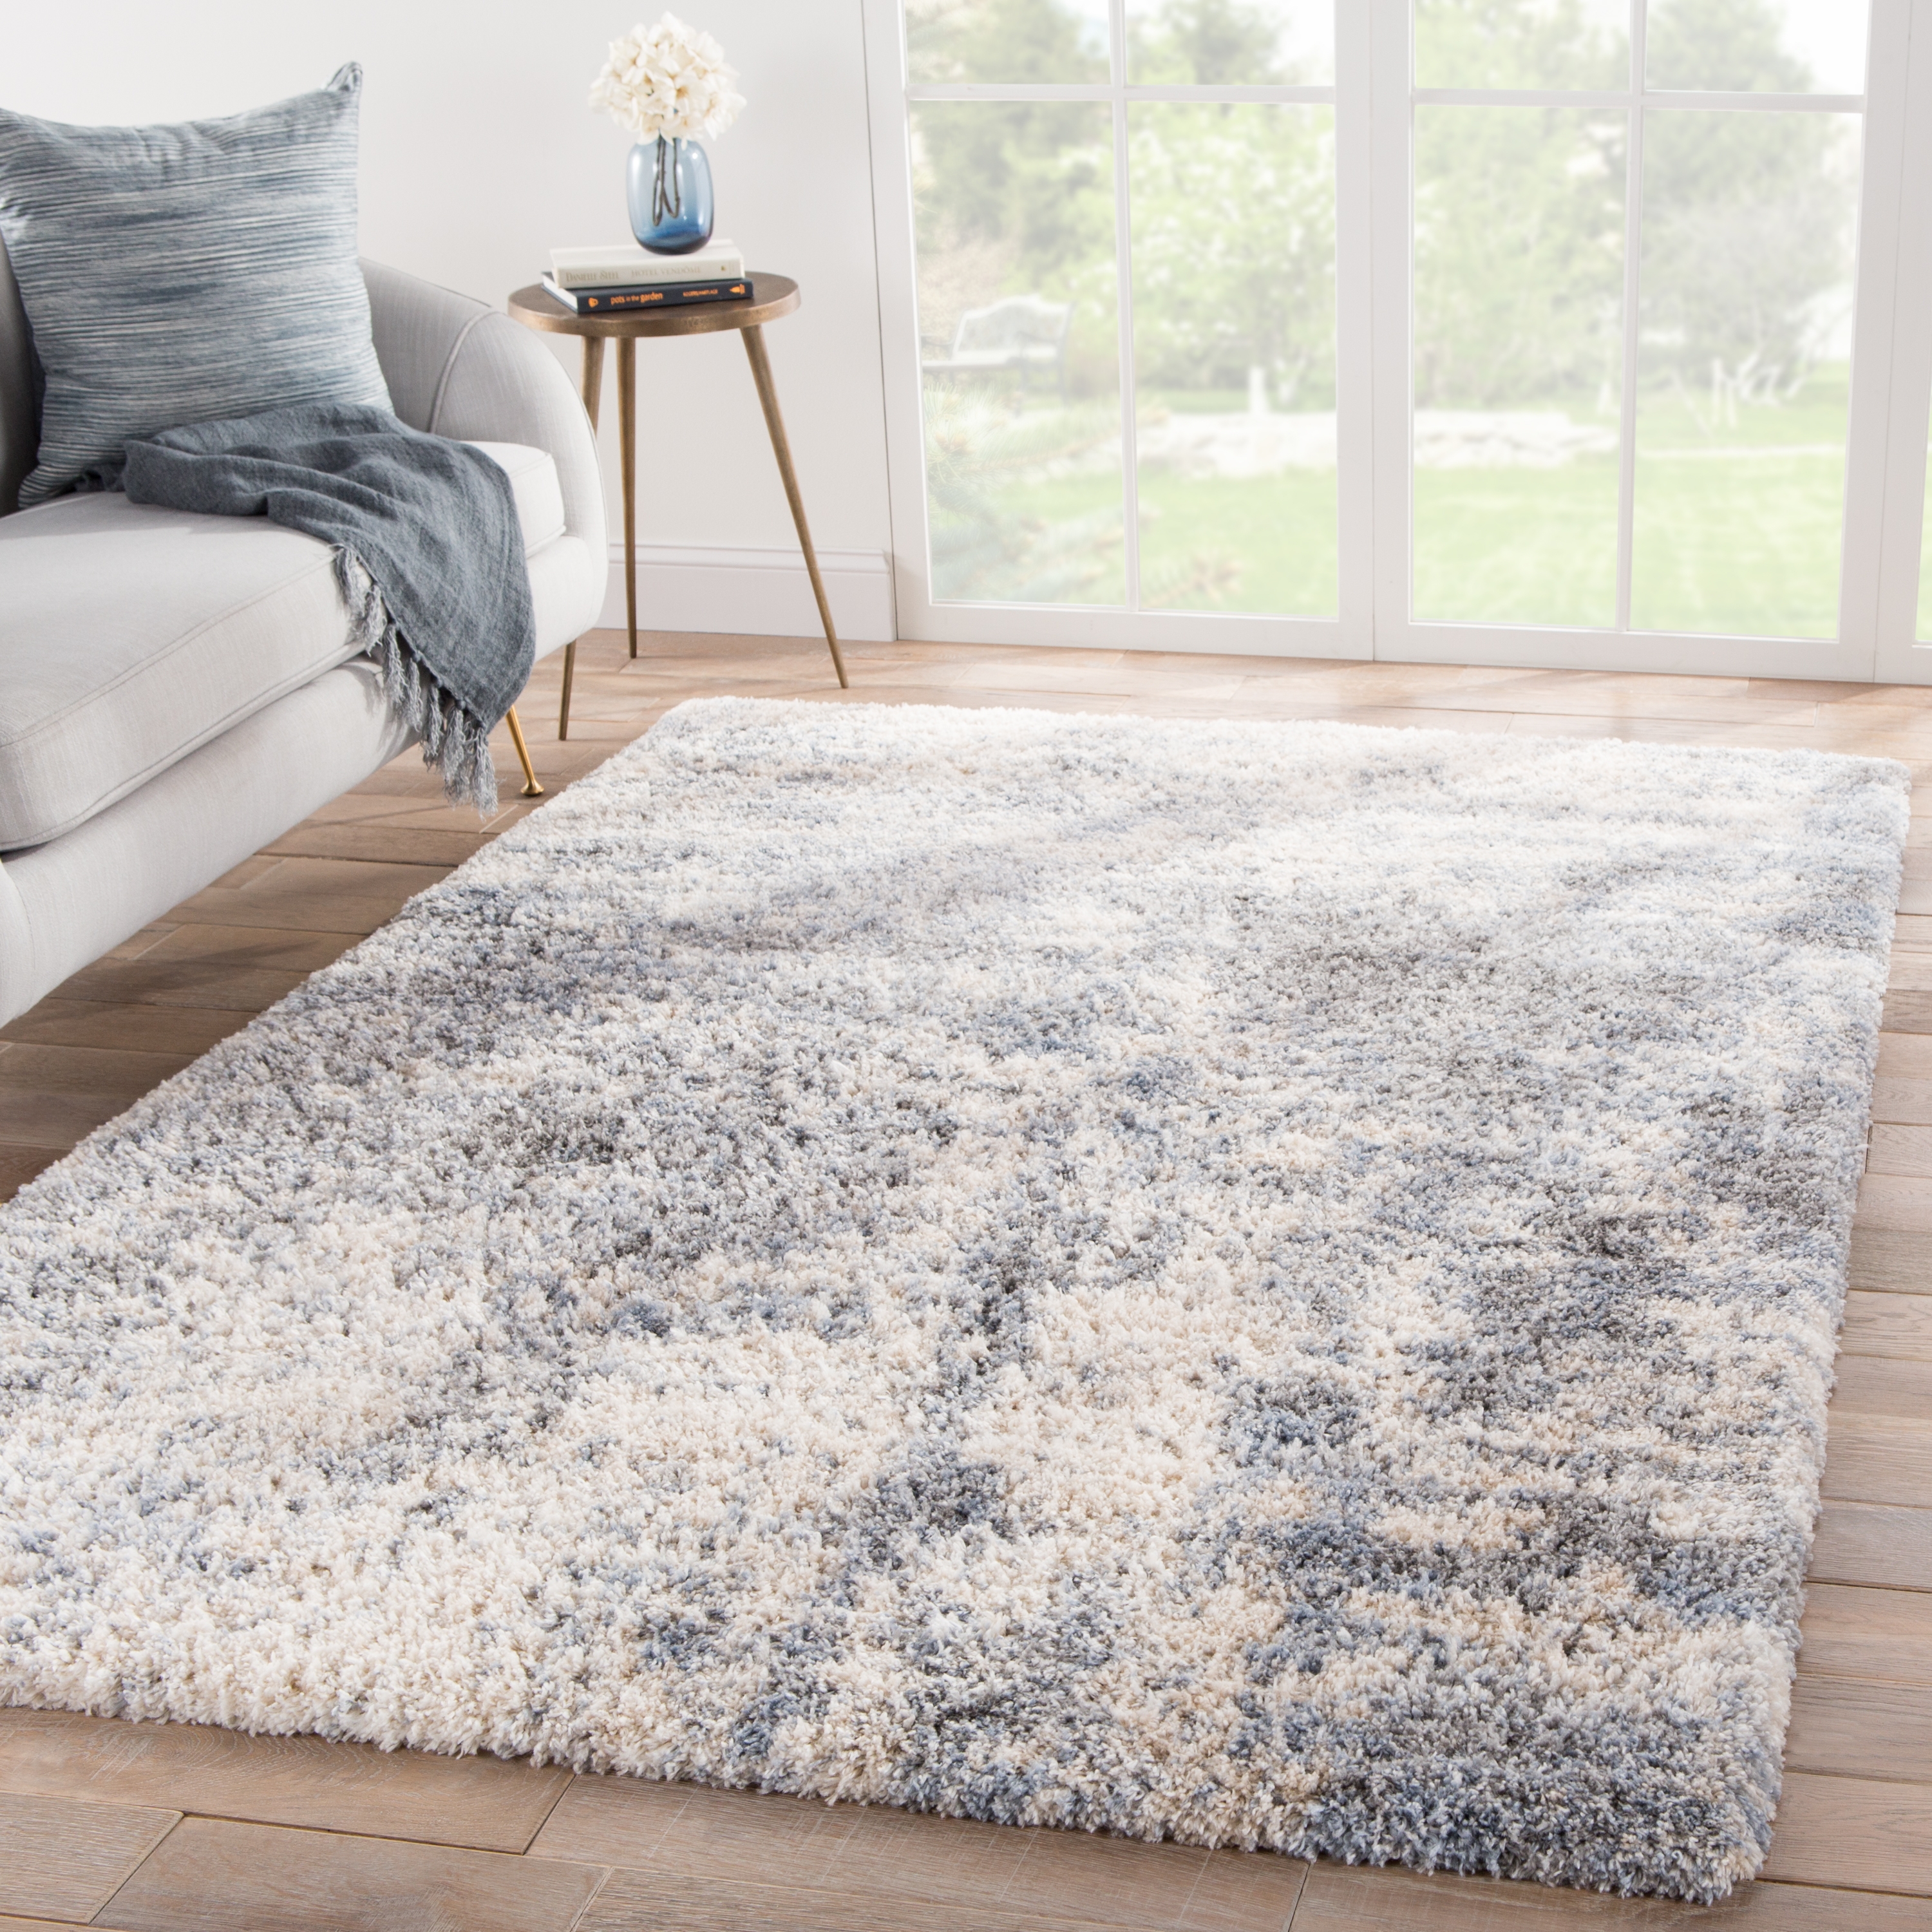 Cantata Abstract Gray/ Blue Area Rug (7'6"X9'6") - Image 4